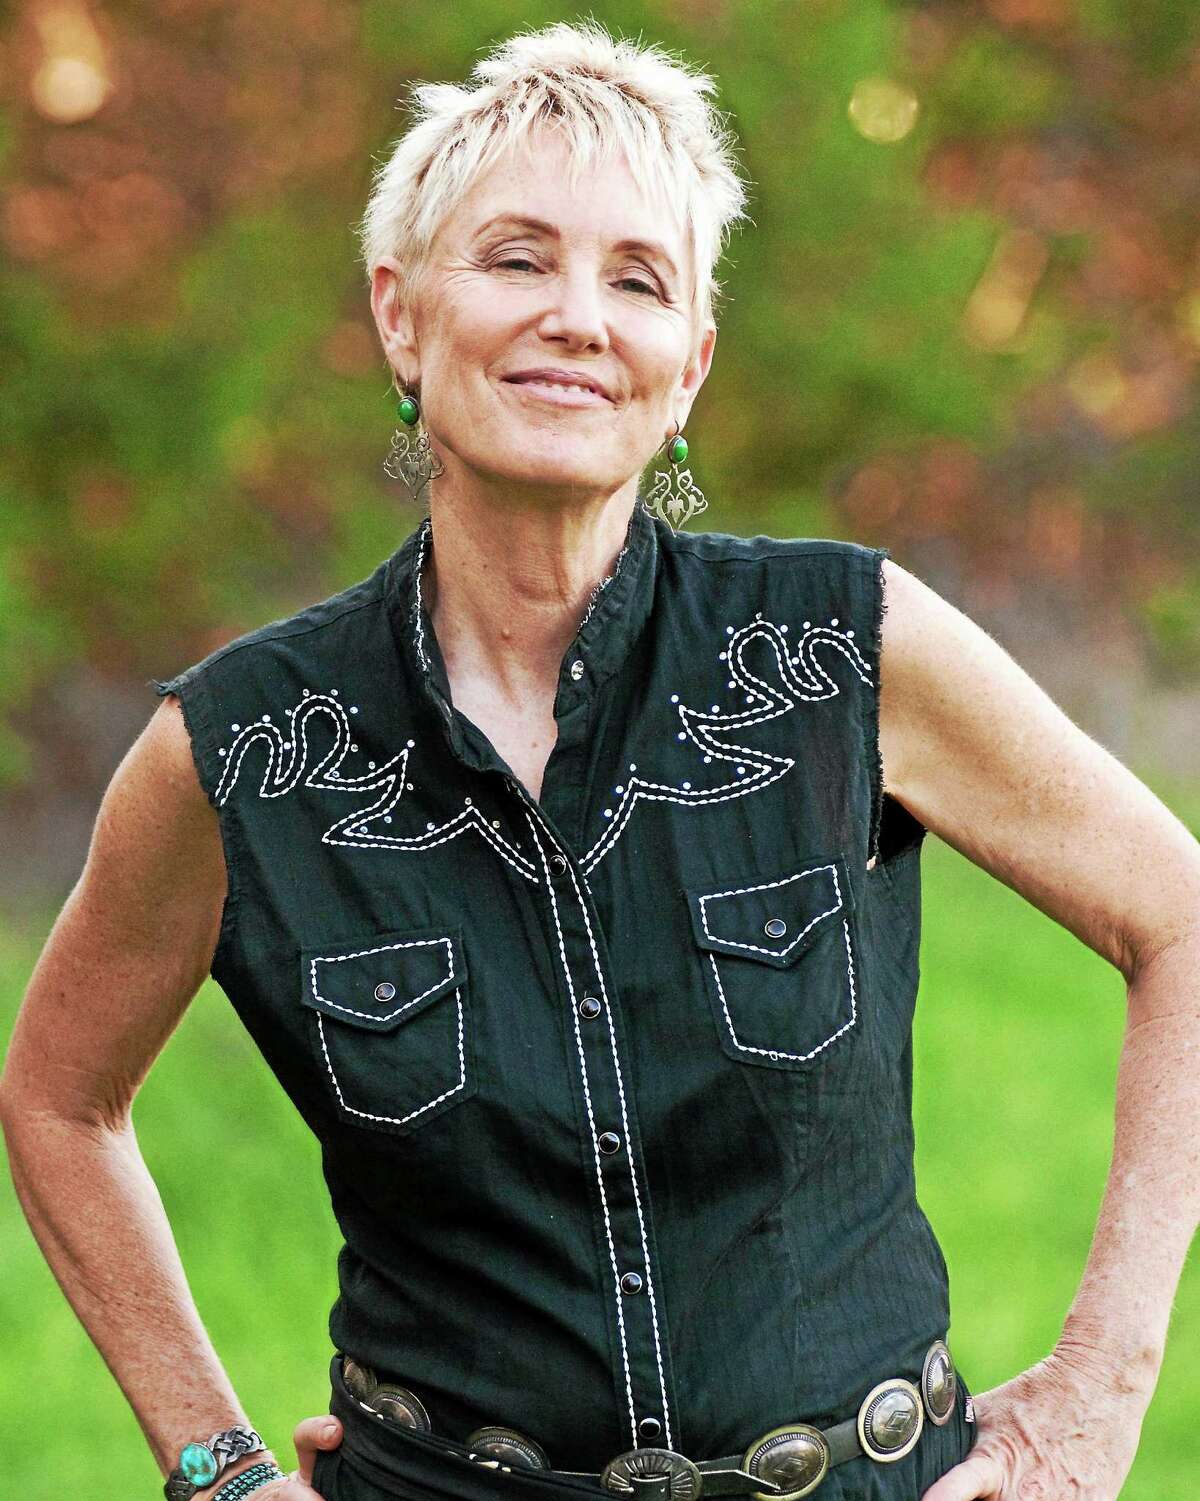 Submitted photo - Eliza Gilkyson HYPERLINK "http://elizagilkyson.com"Eliza Gilkyson is performing a concert in support of her new Red House Records release, “The Nocturne Diaries,”Saturday, Oct. 4 at 7:30 p.m. at HYPERLINK "http://www.roaringbrookconcerts.org"Roaring Brook Nature Center, Gracey Road, Canton.